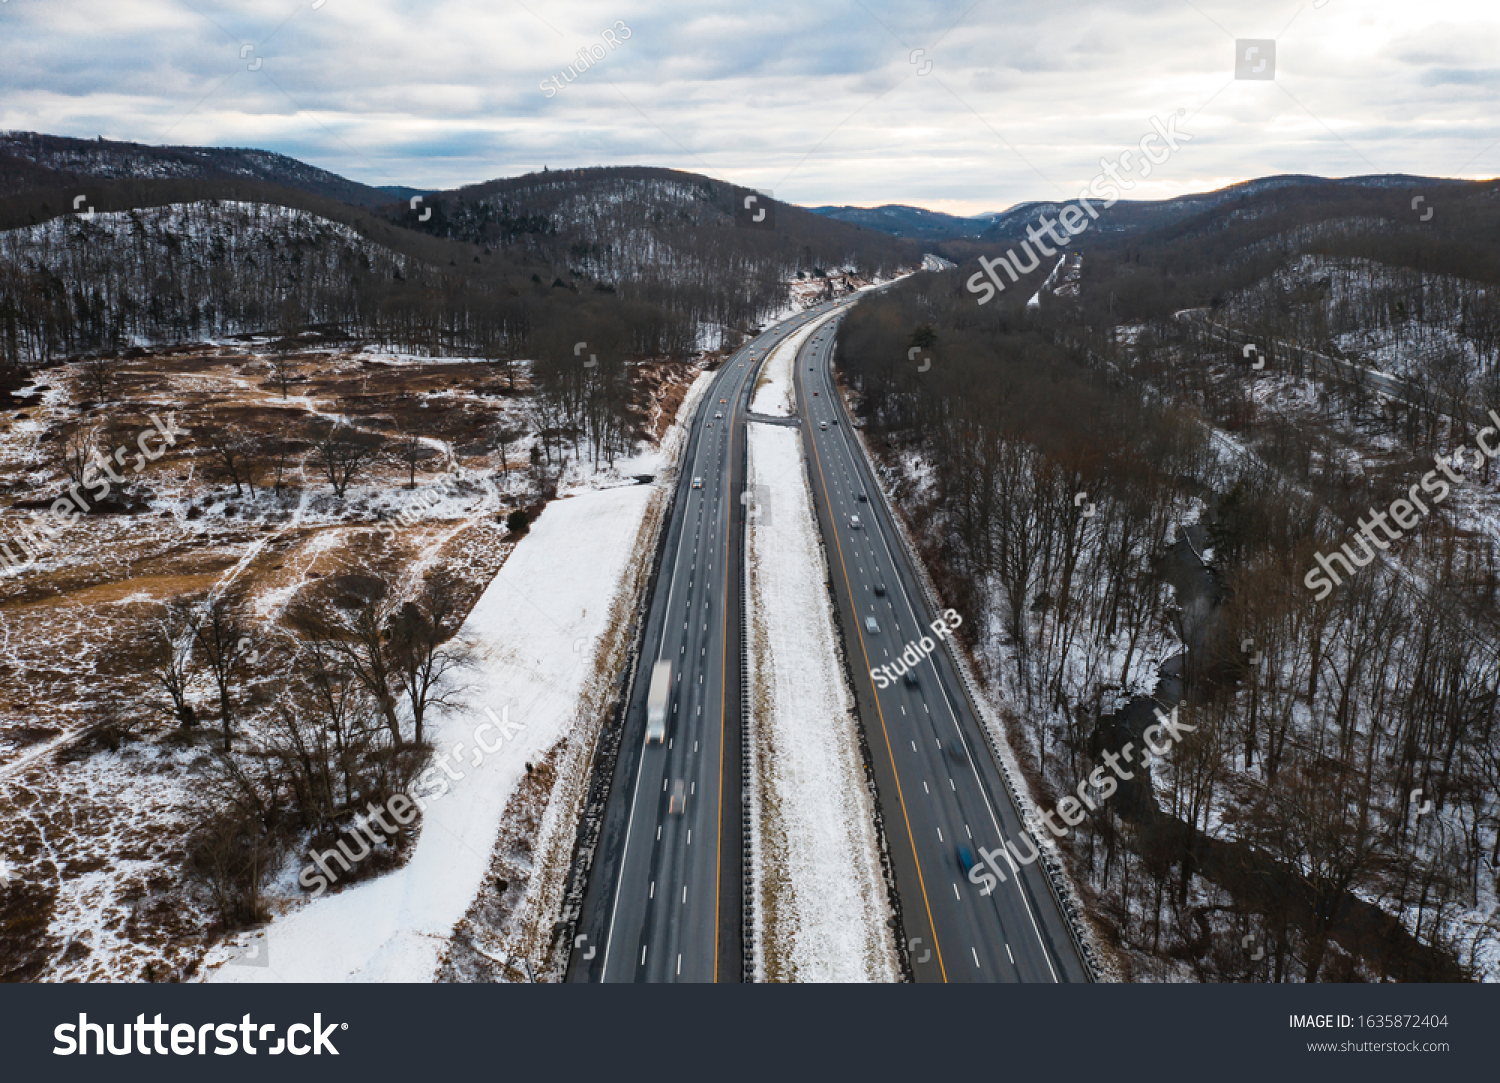 Aerial view of road - Traffic in The New York State Thruway (85) near Arden - NY - USA #1635872404